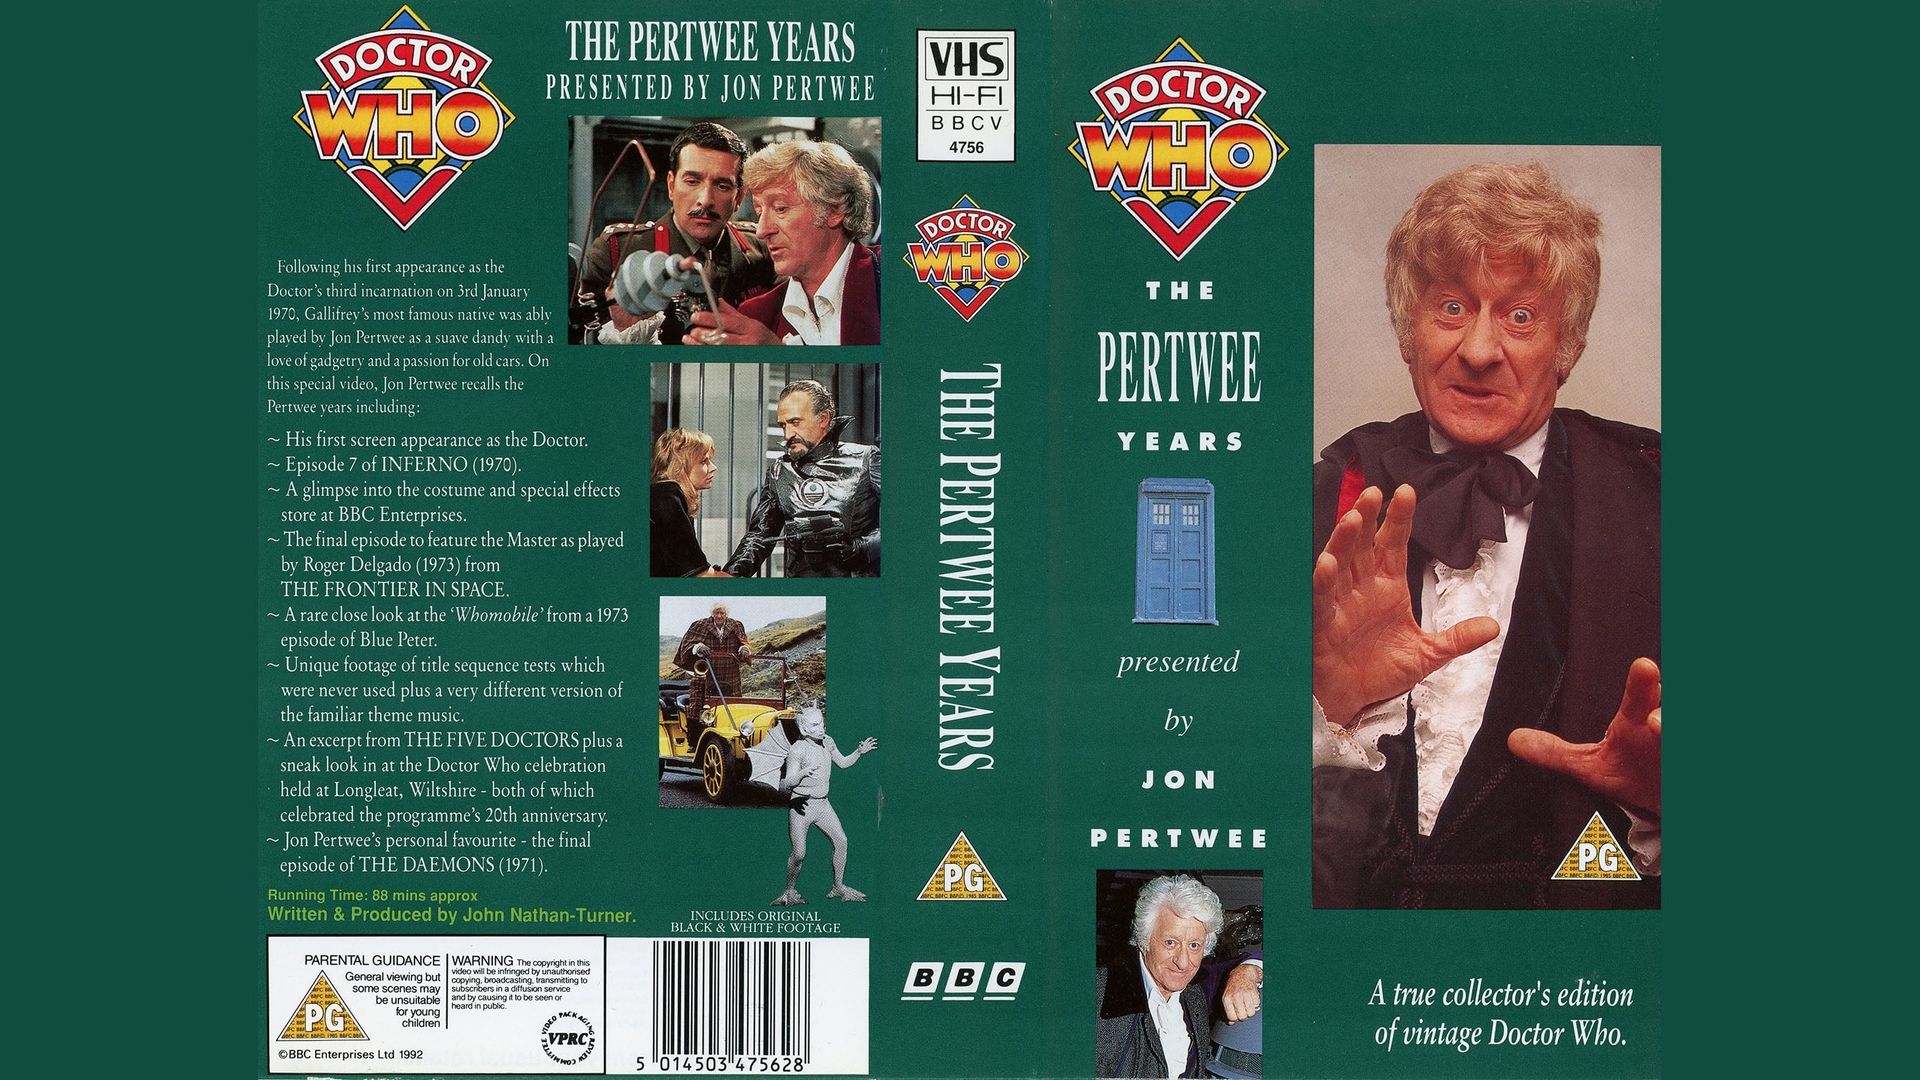 Doctor Who: The Pertwee Years background